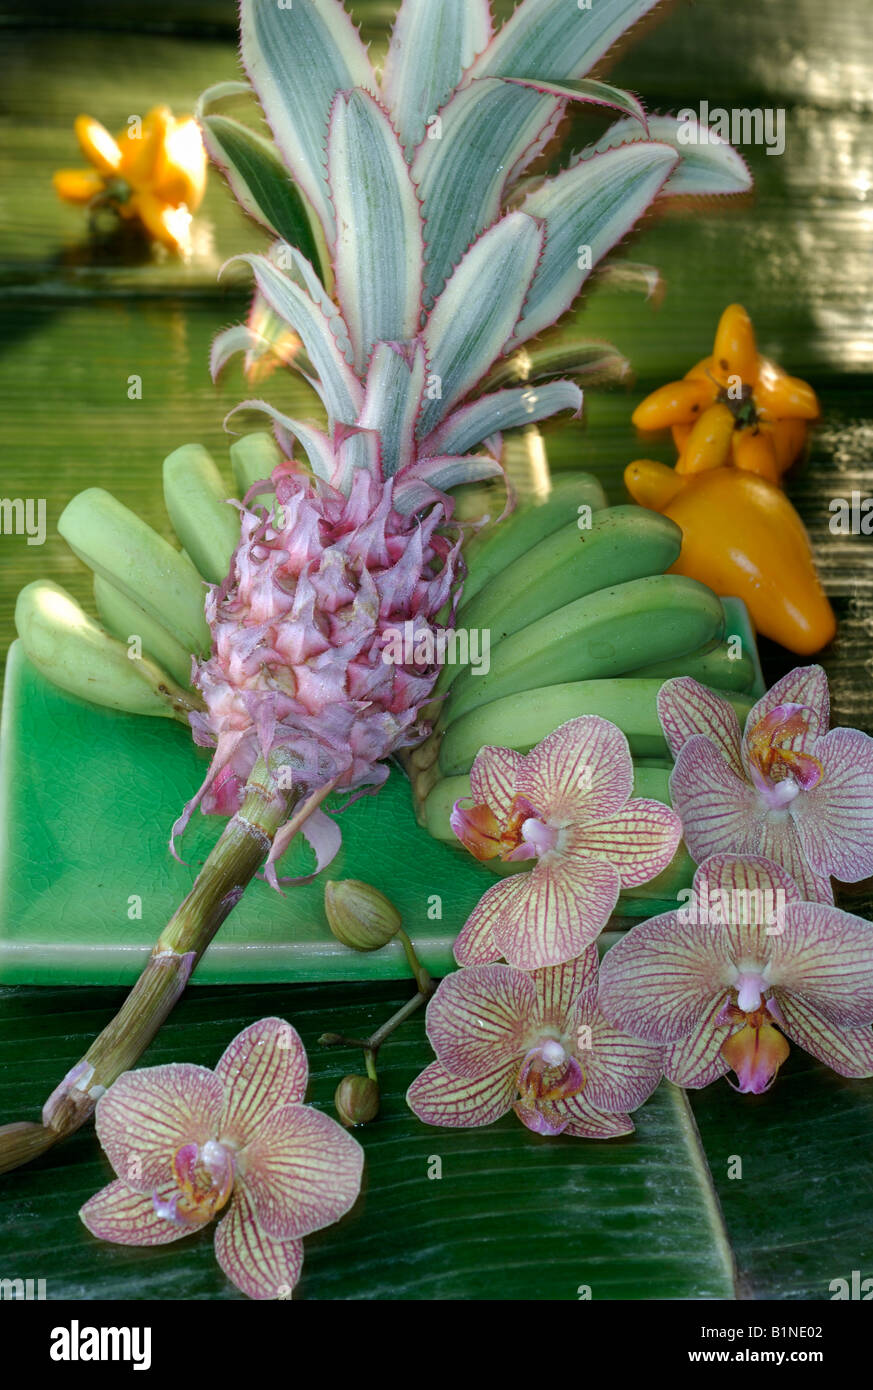 Arrangement of bromelias, bananas and orchid blossoms Stock Photo